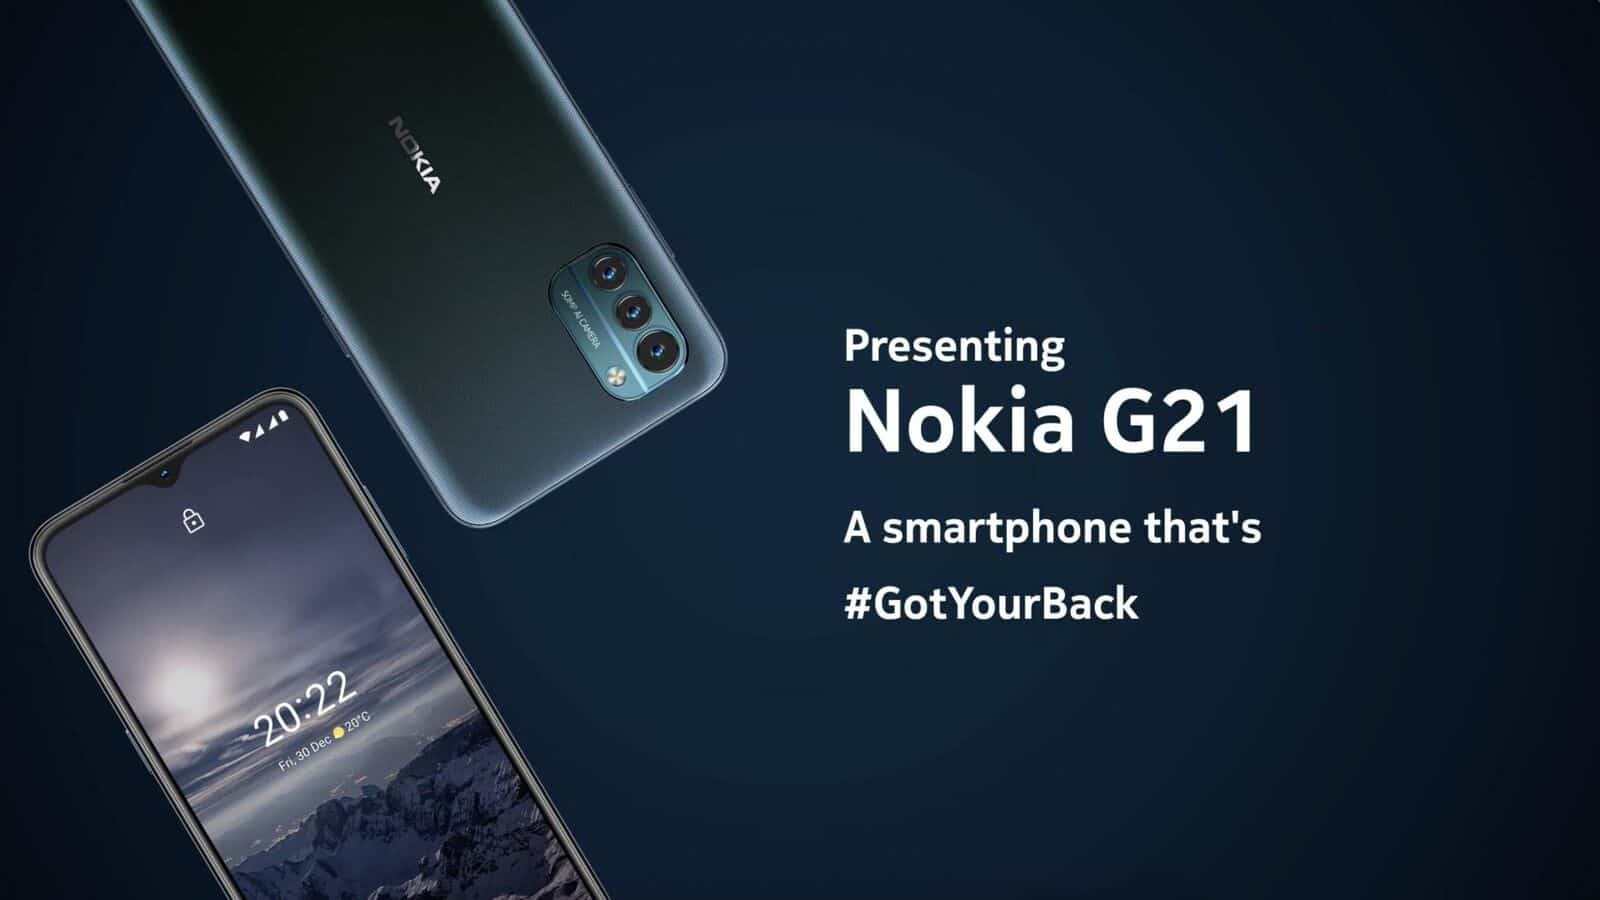 Launch of Nokia G21